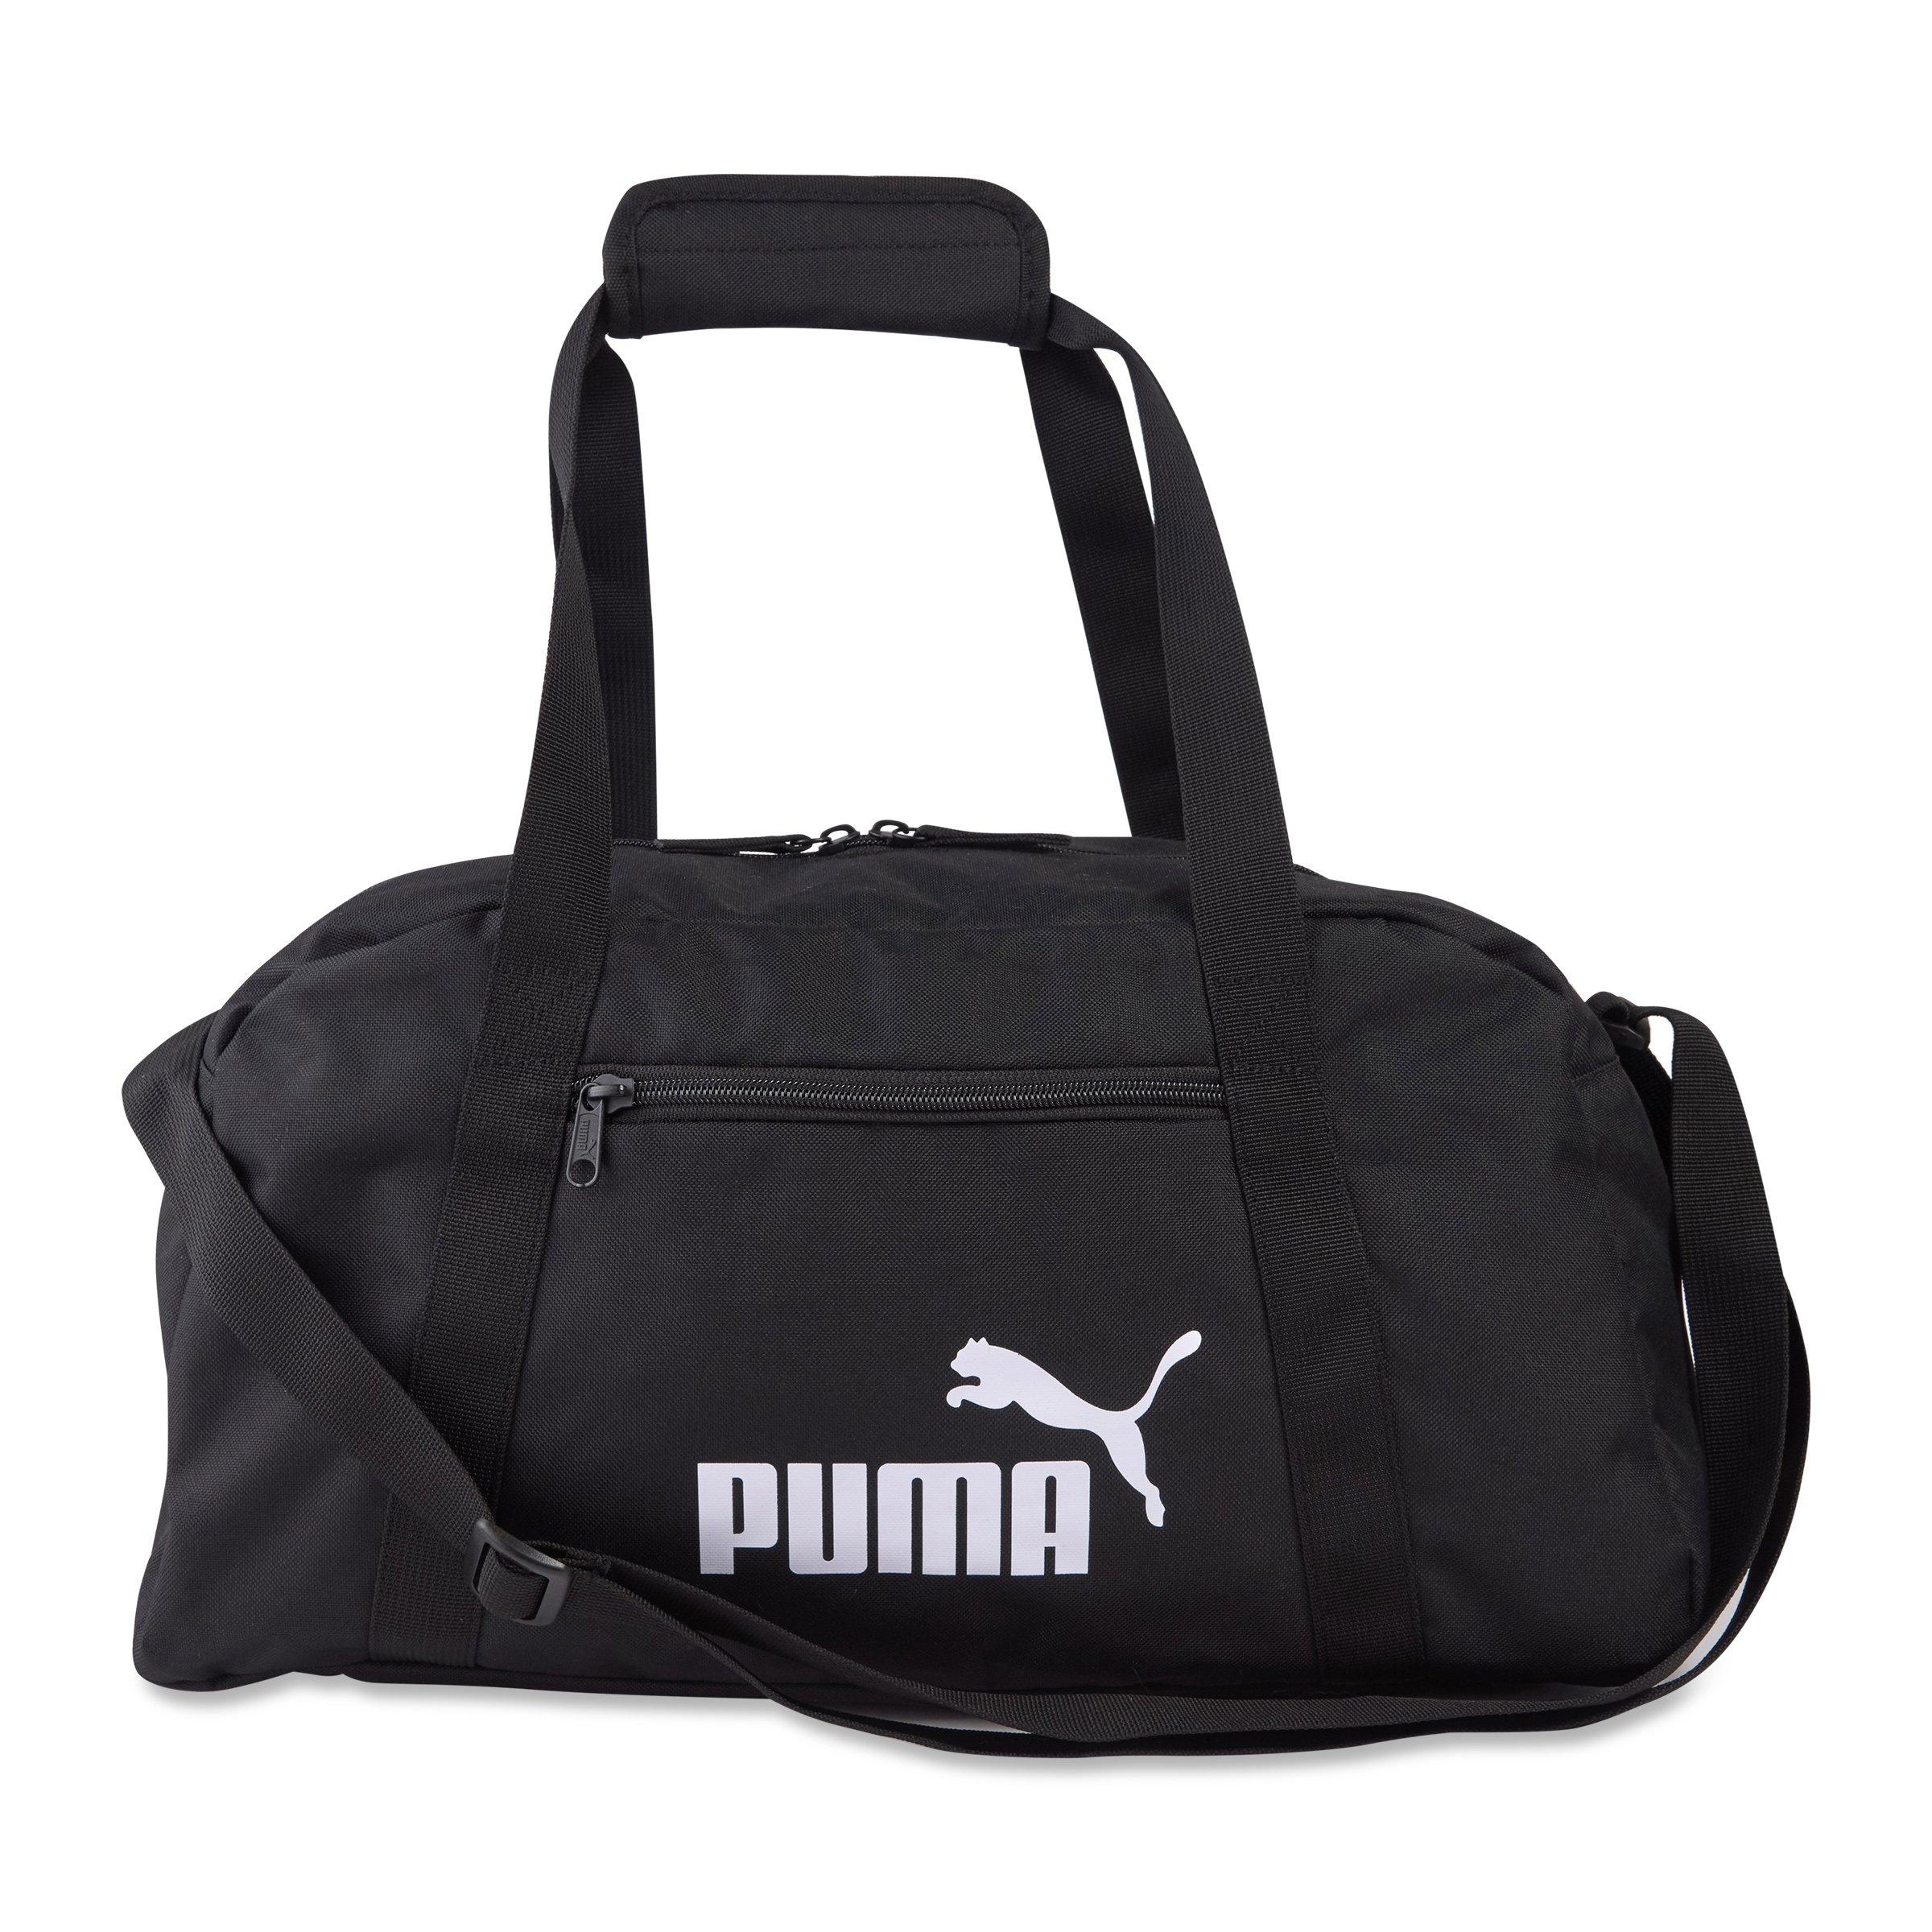 Buy Puma Phase Gym Bag Accessories Online | Office London